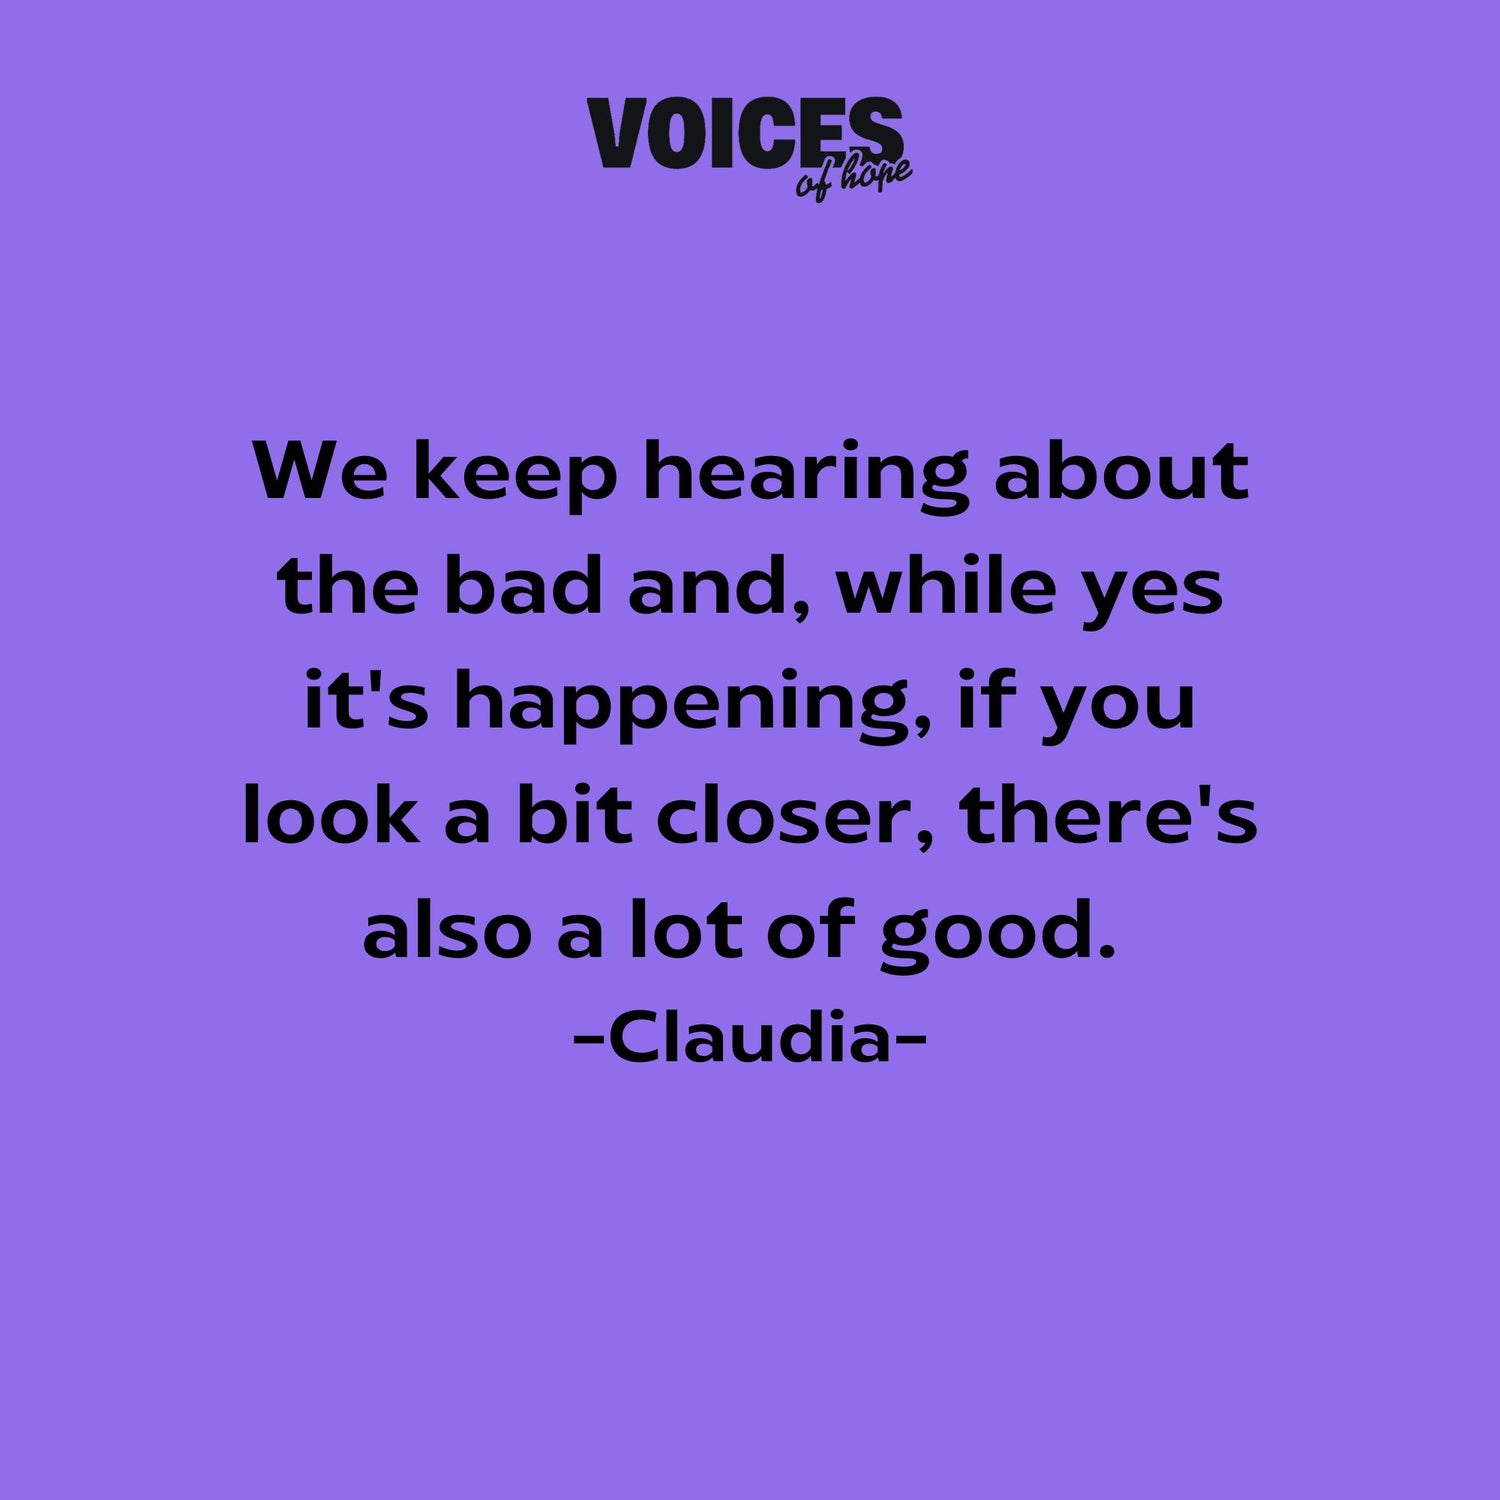 Purple background with black writing that reads: "we keep hearing about the bad and, while yes it's happening, if you look a bit closer, there's also a lot of good. Claudia."